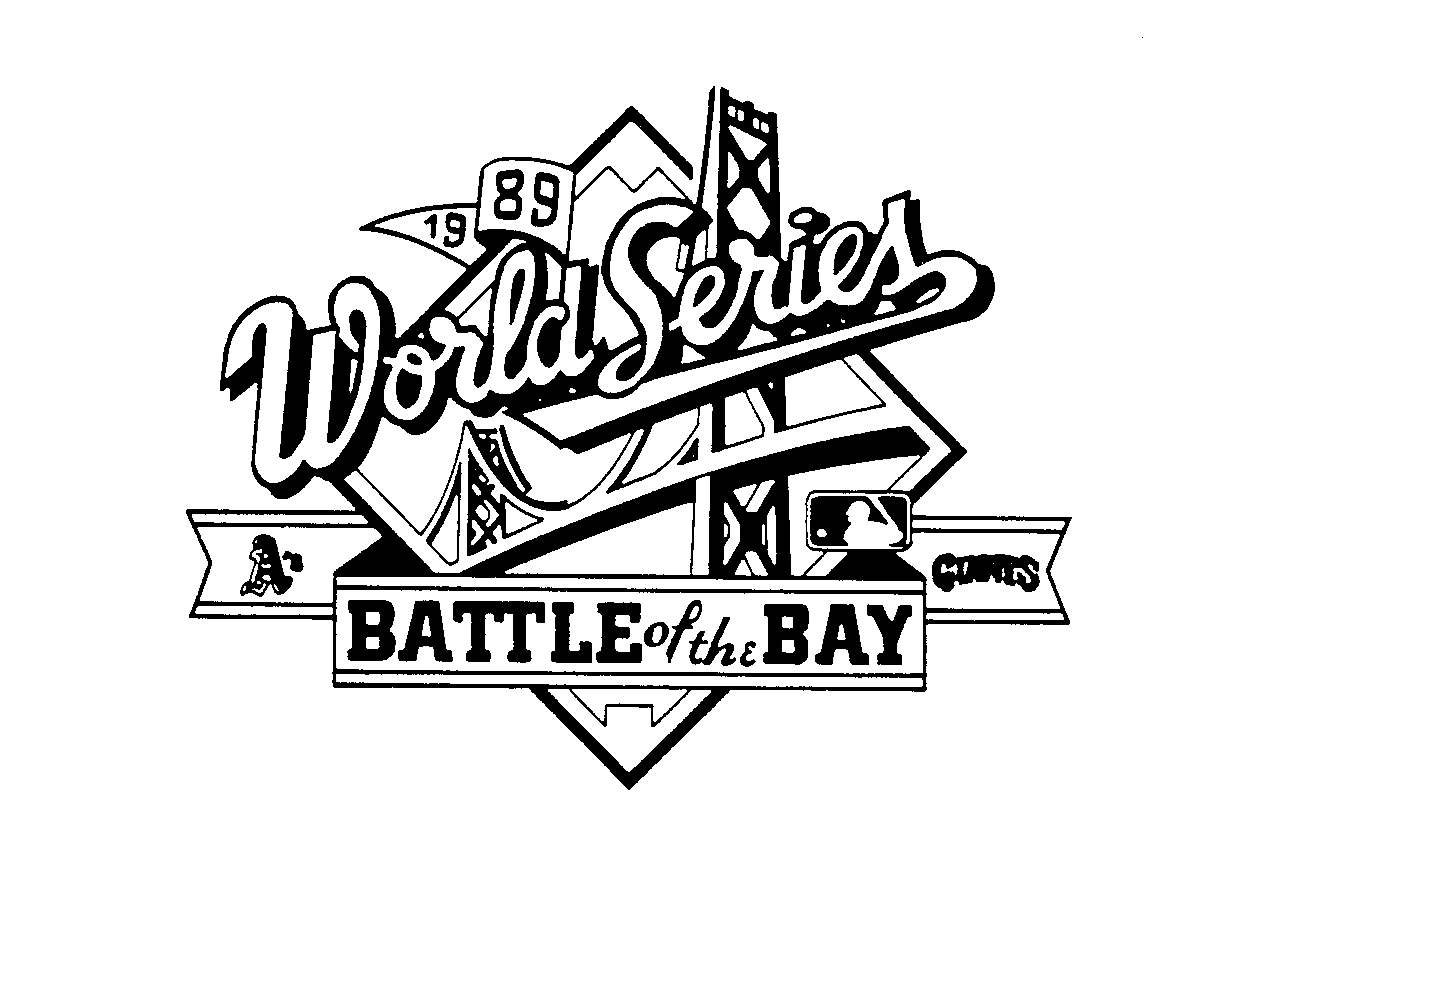  1989 WORLD SERIES BATTLE OF THE BAY A'S GIANTS